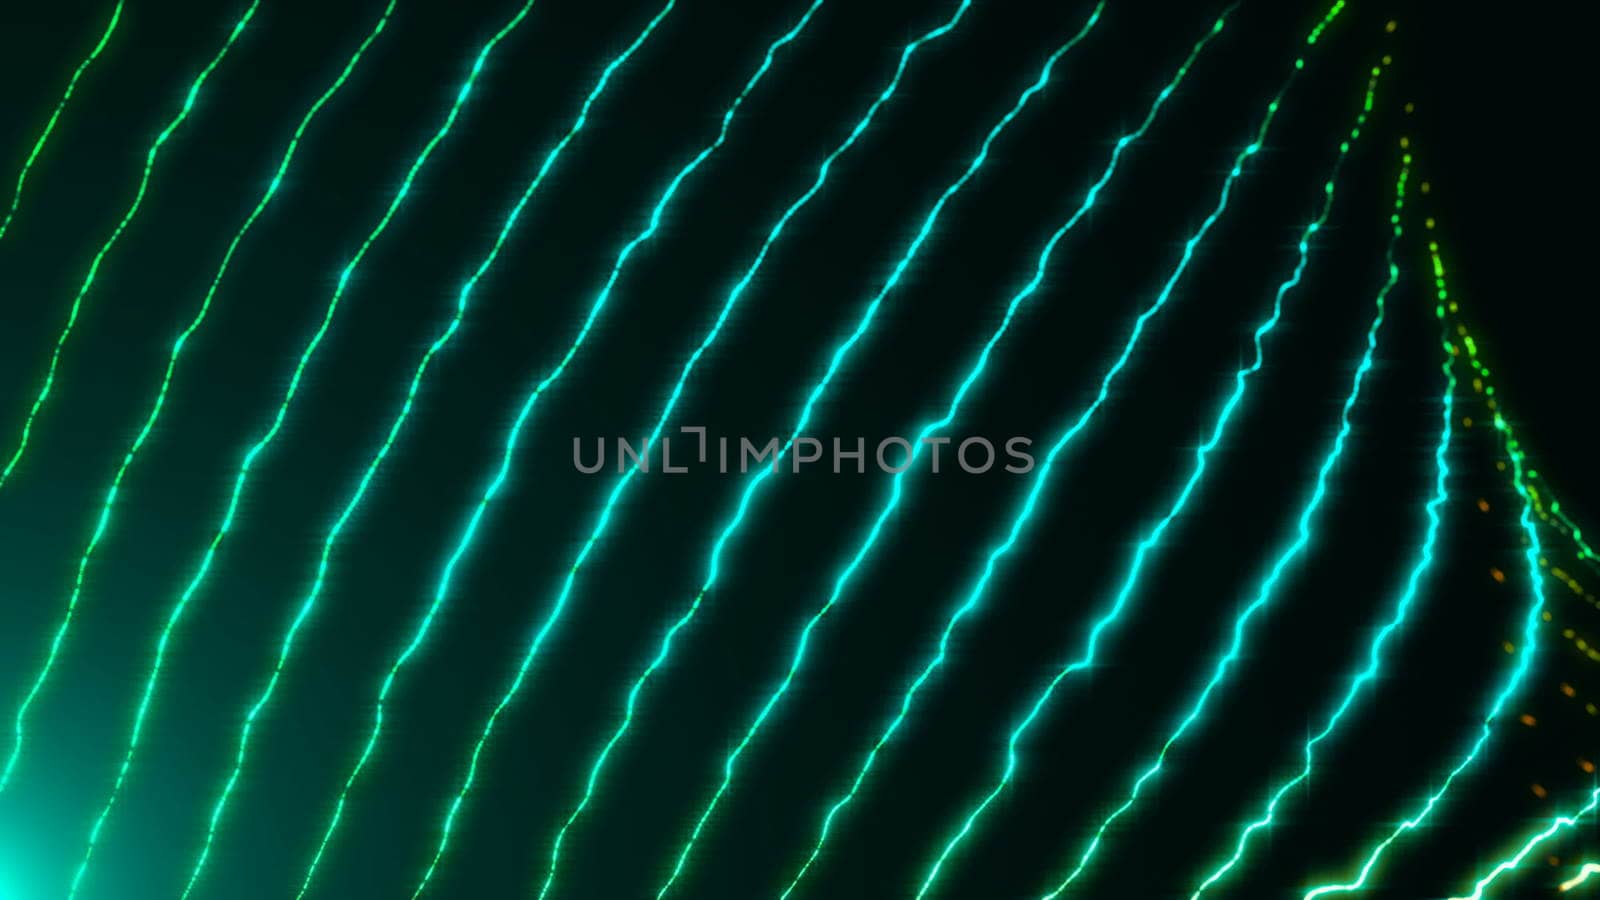 Abstract background with strings. Seamless loop